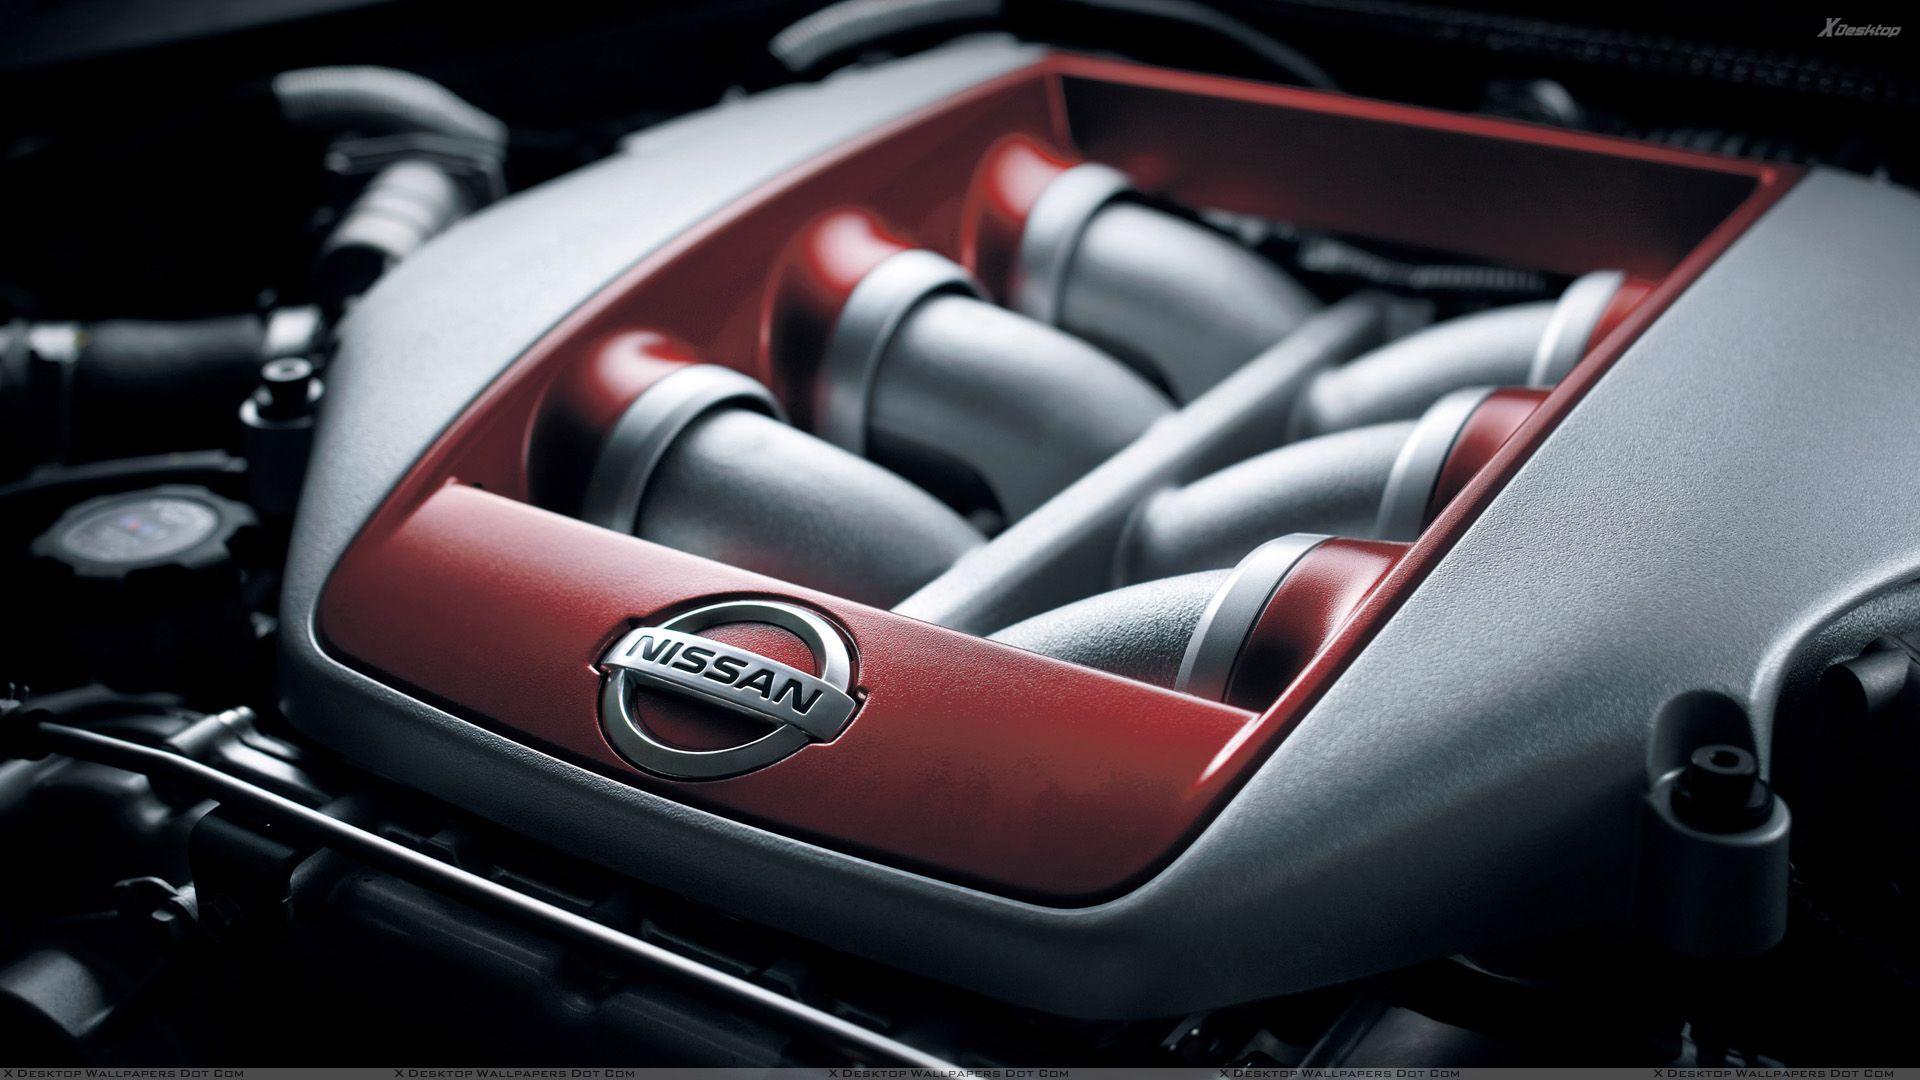 Car Engines Wallpaper, Photo & Image in HD